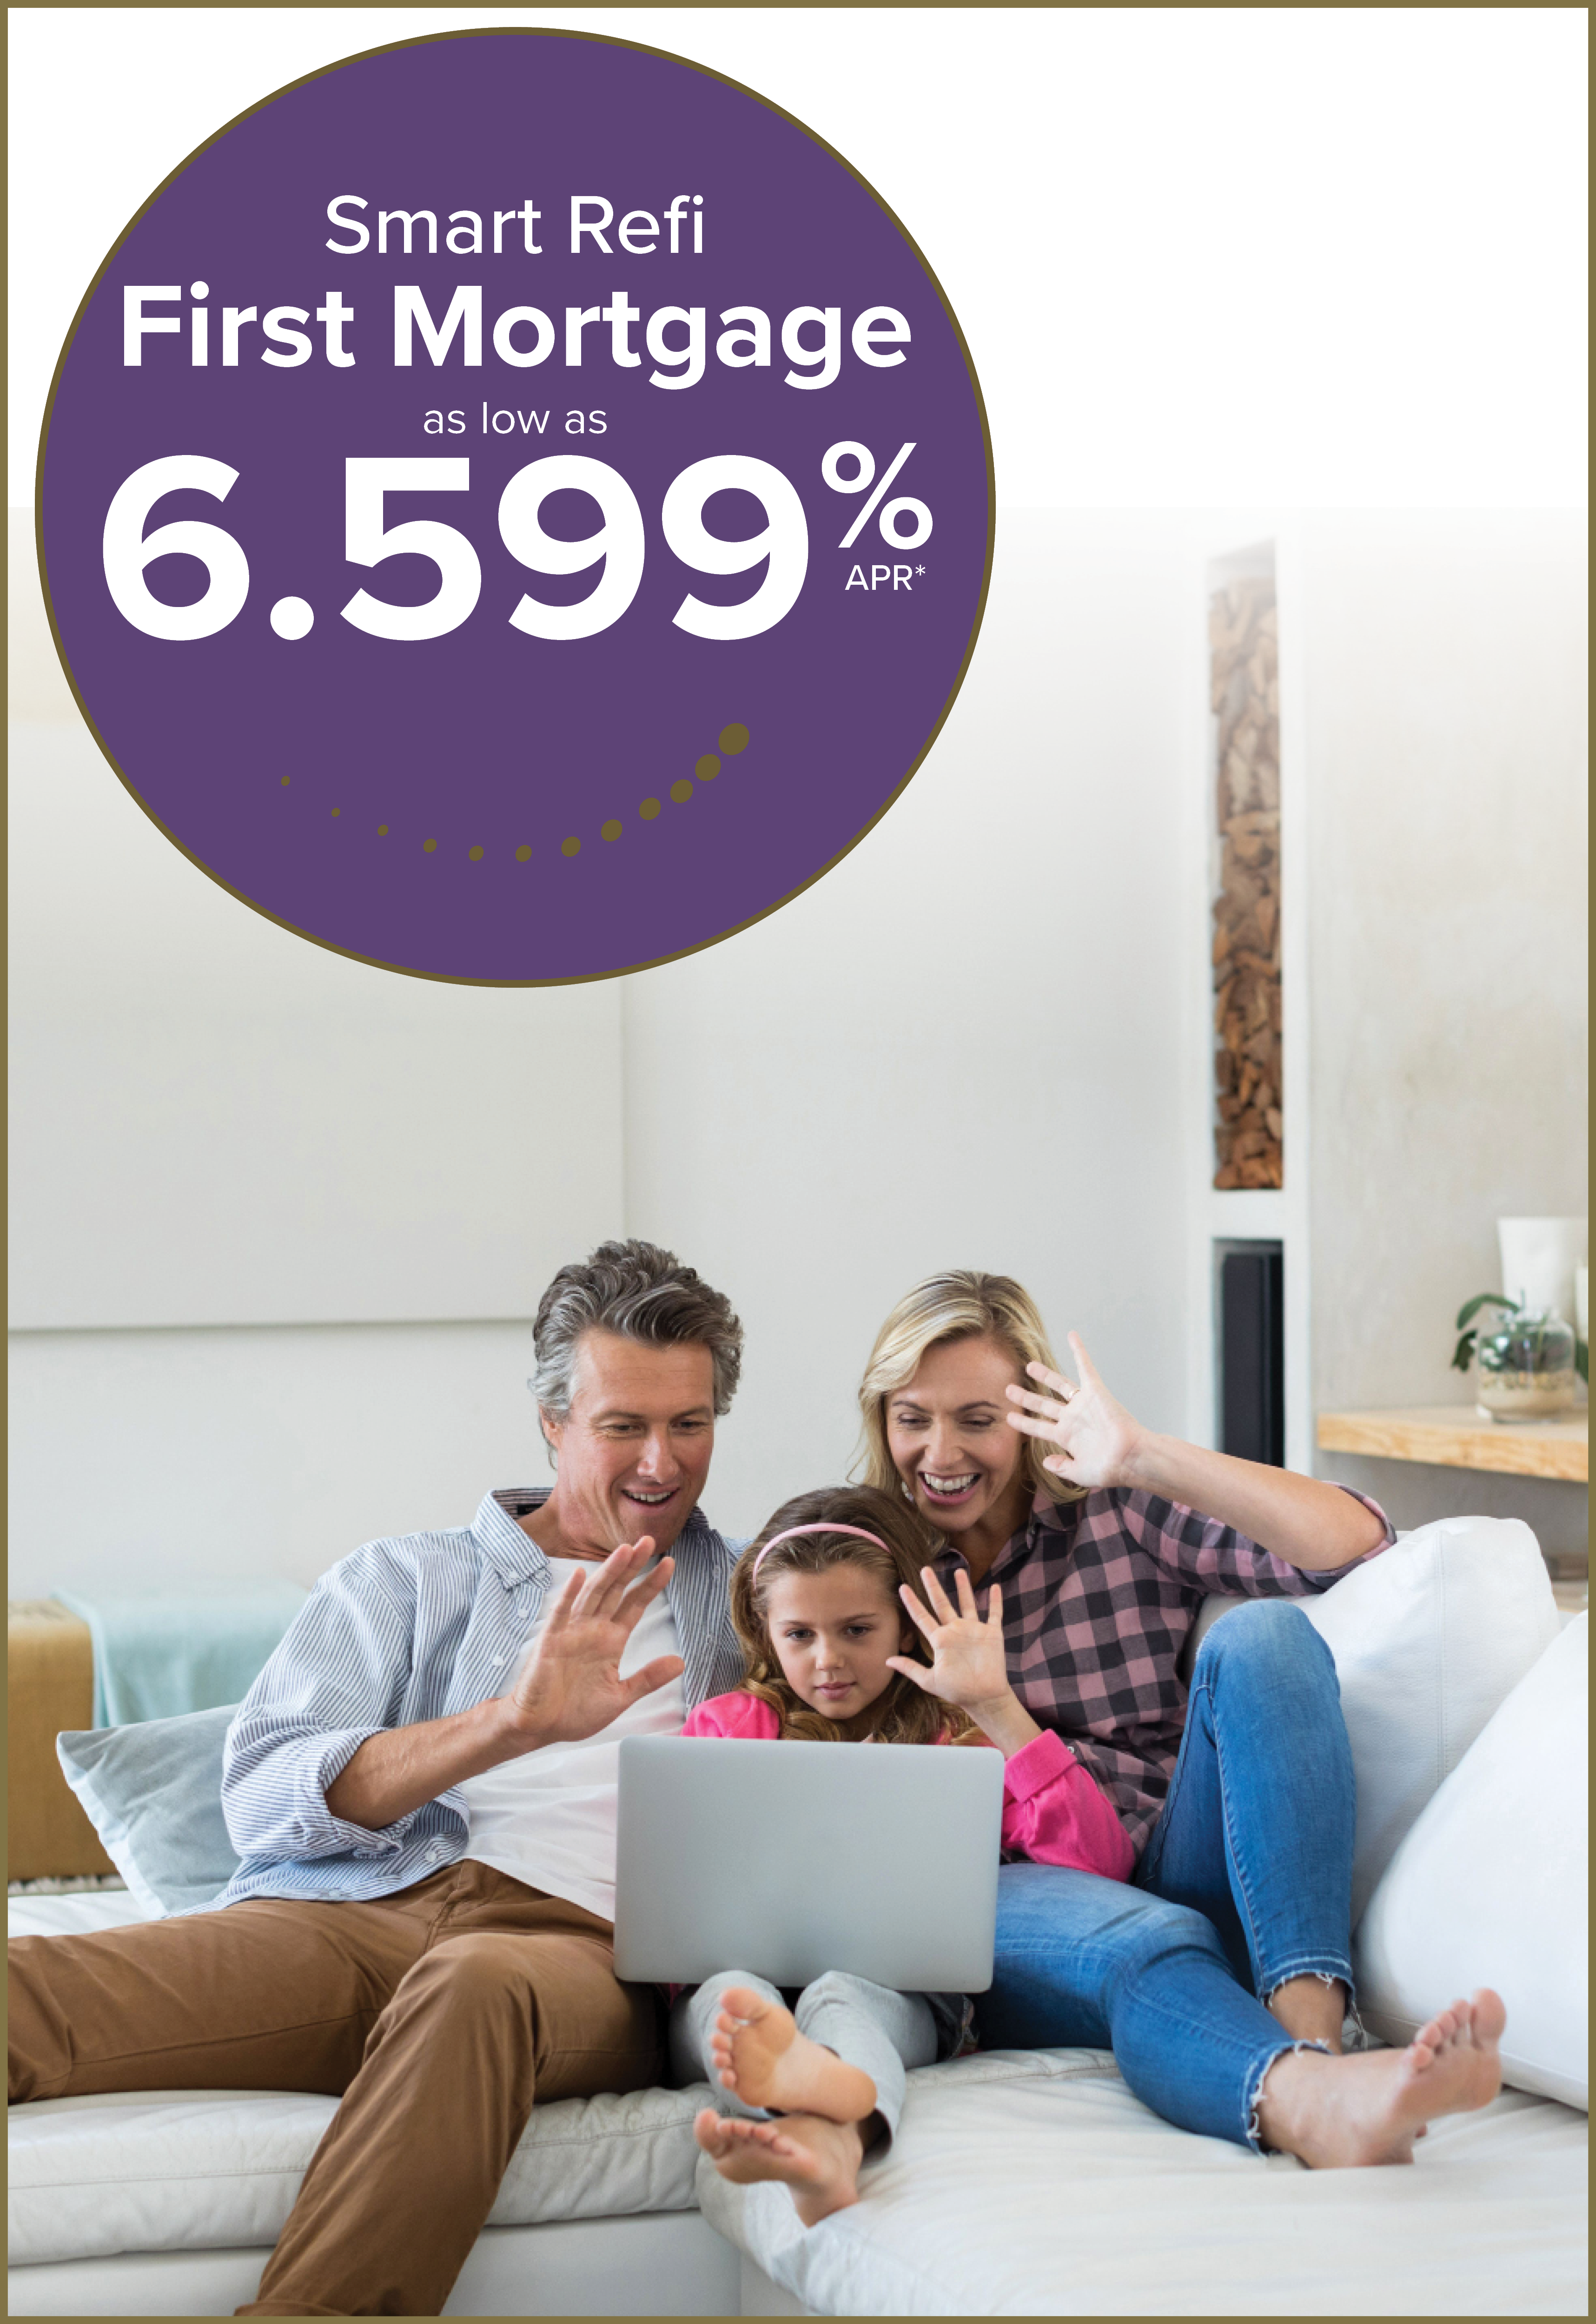 Smart Refi First Mortgage as low as 6.599% APR